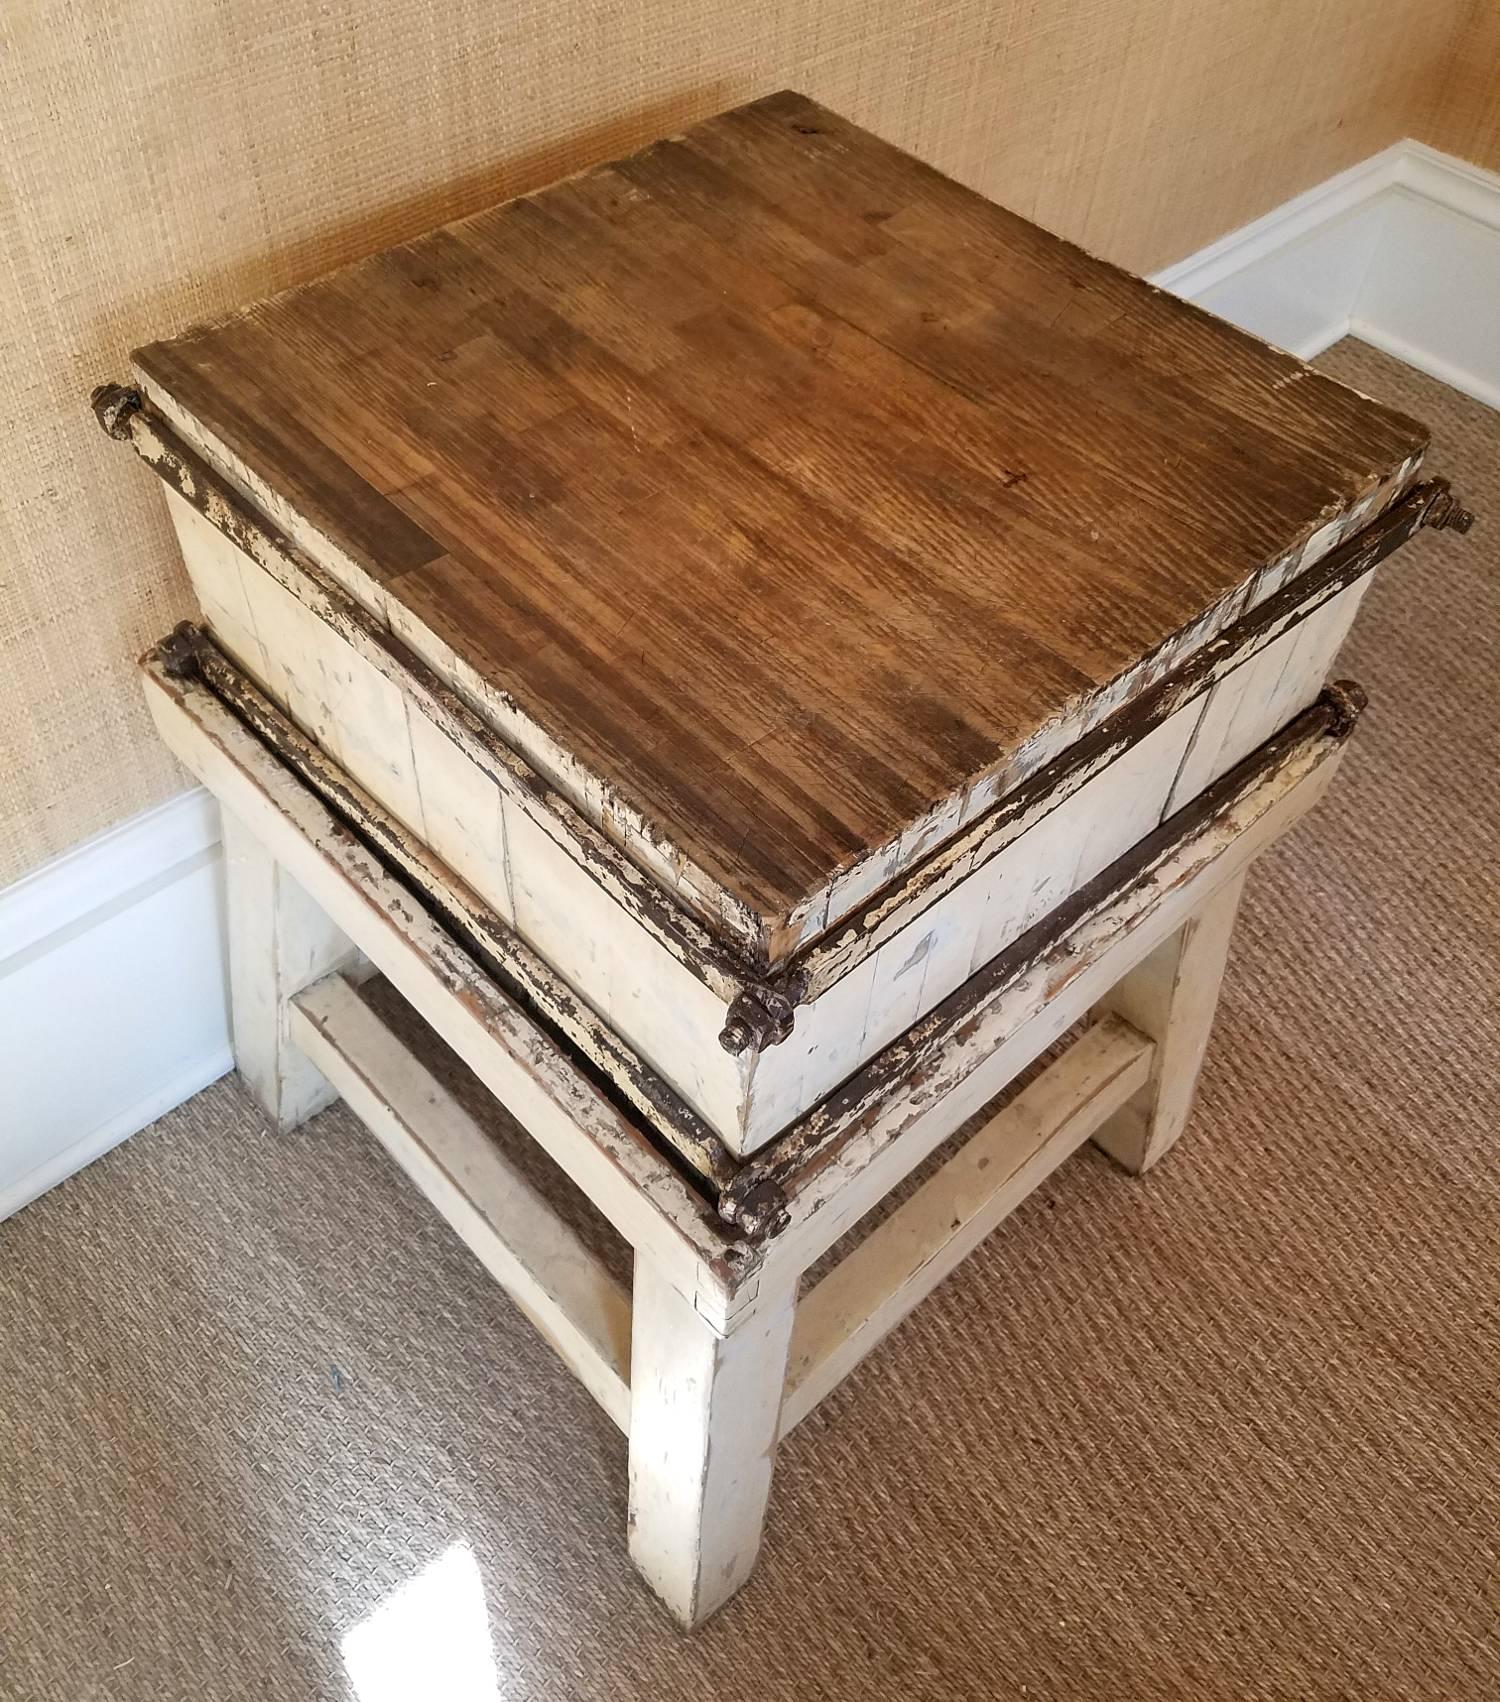 French Provincial Sweet Vintage Butcher Block from France, circa 1900